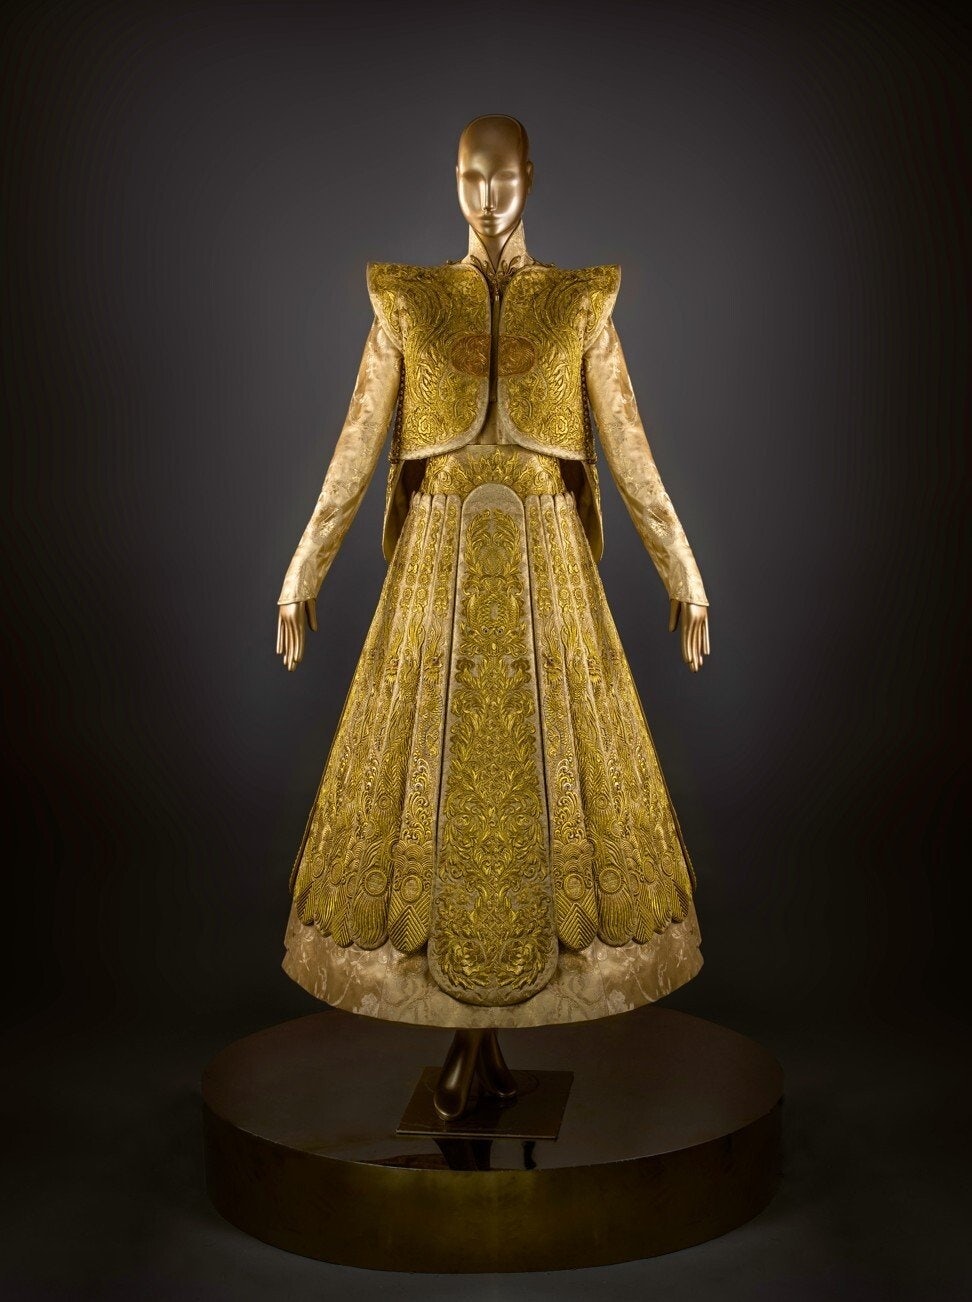 Guo Pei’s traditional bridal dress took five years to make using pure gold embroidery thread. Photo: Guo Pei